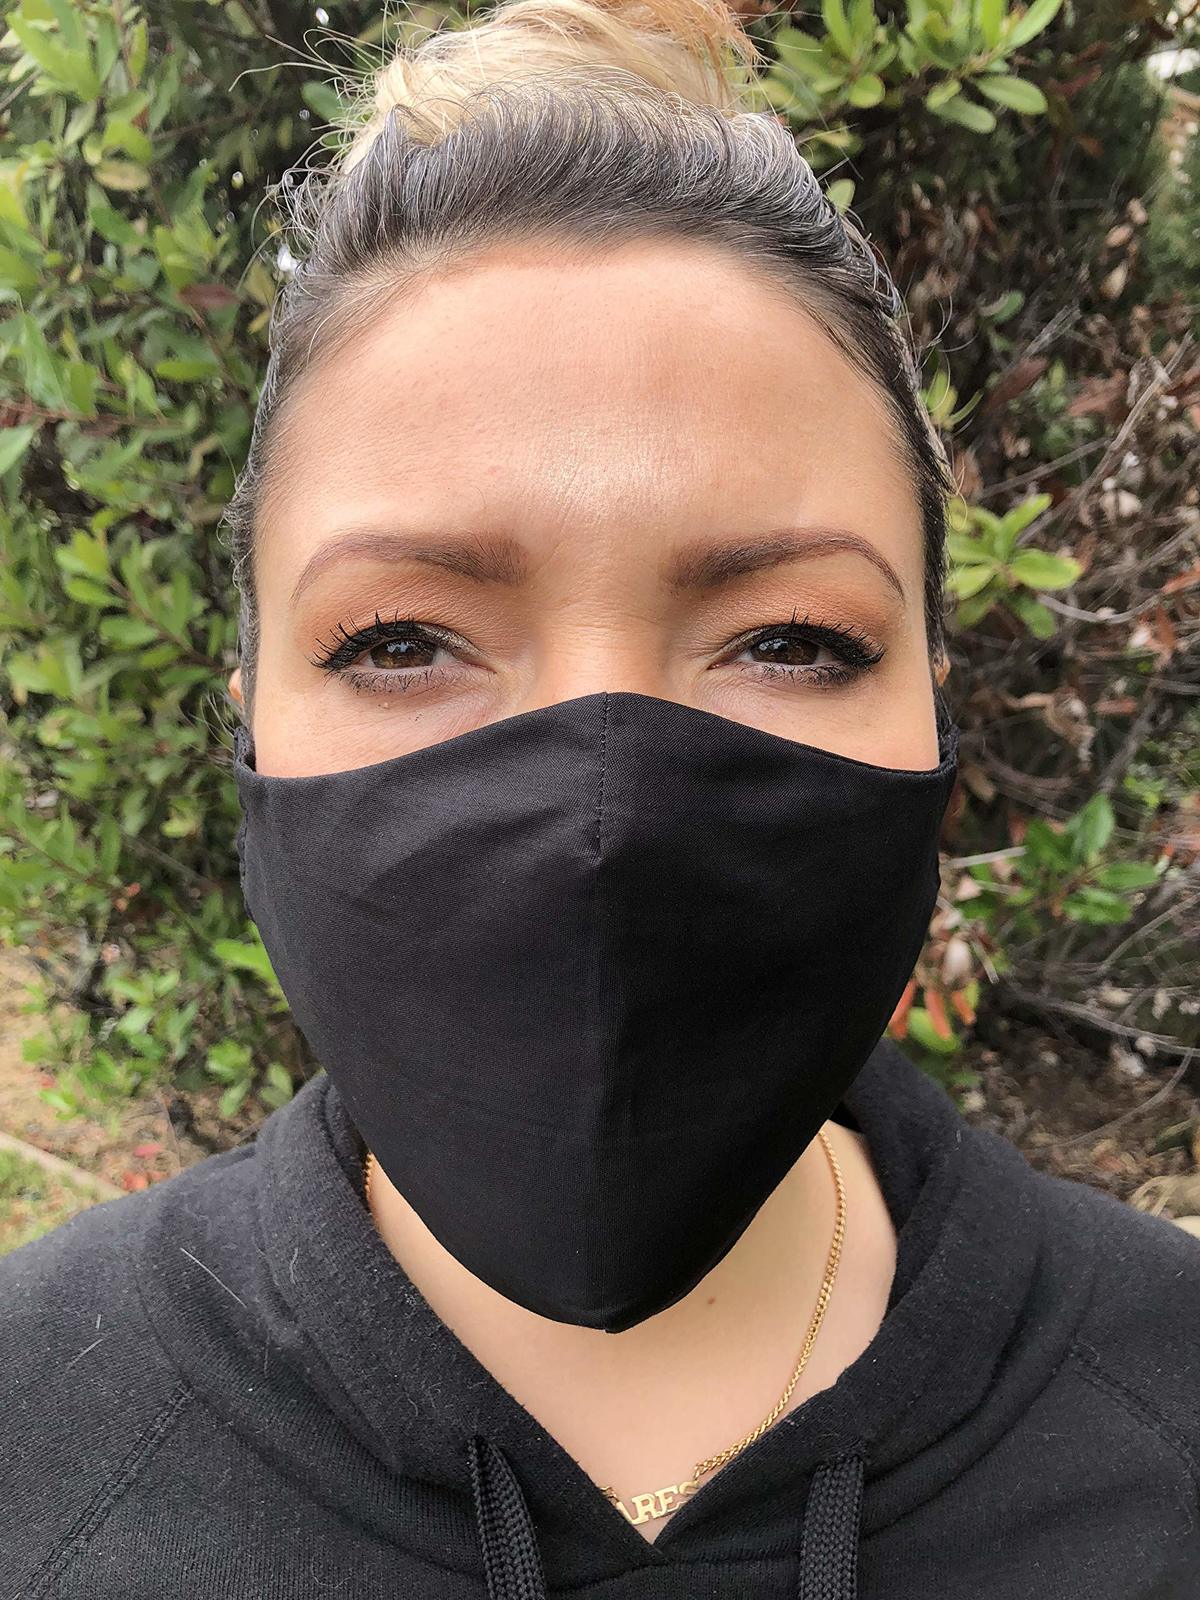 Primary image for 100% Black Face Mask Triple Layered Filter Fabric Made in Italy Washable Reusabl